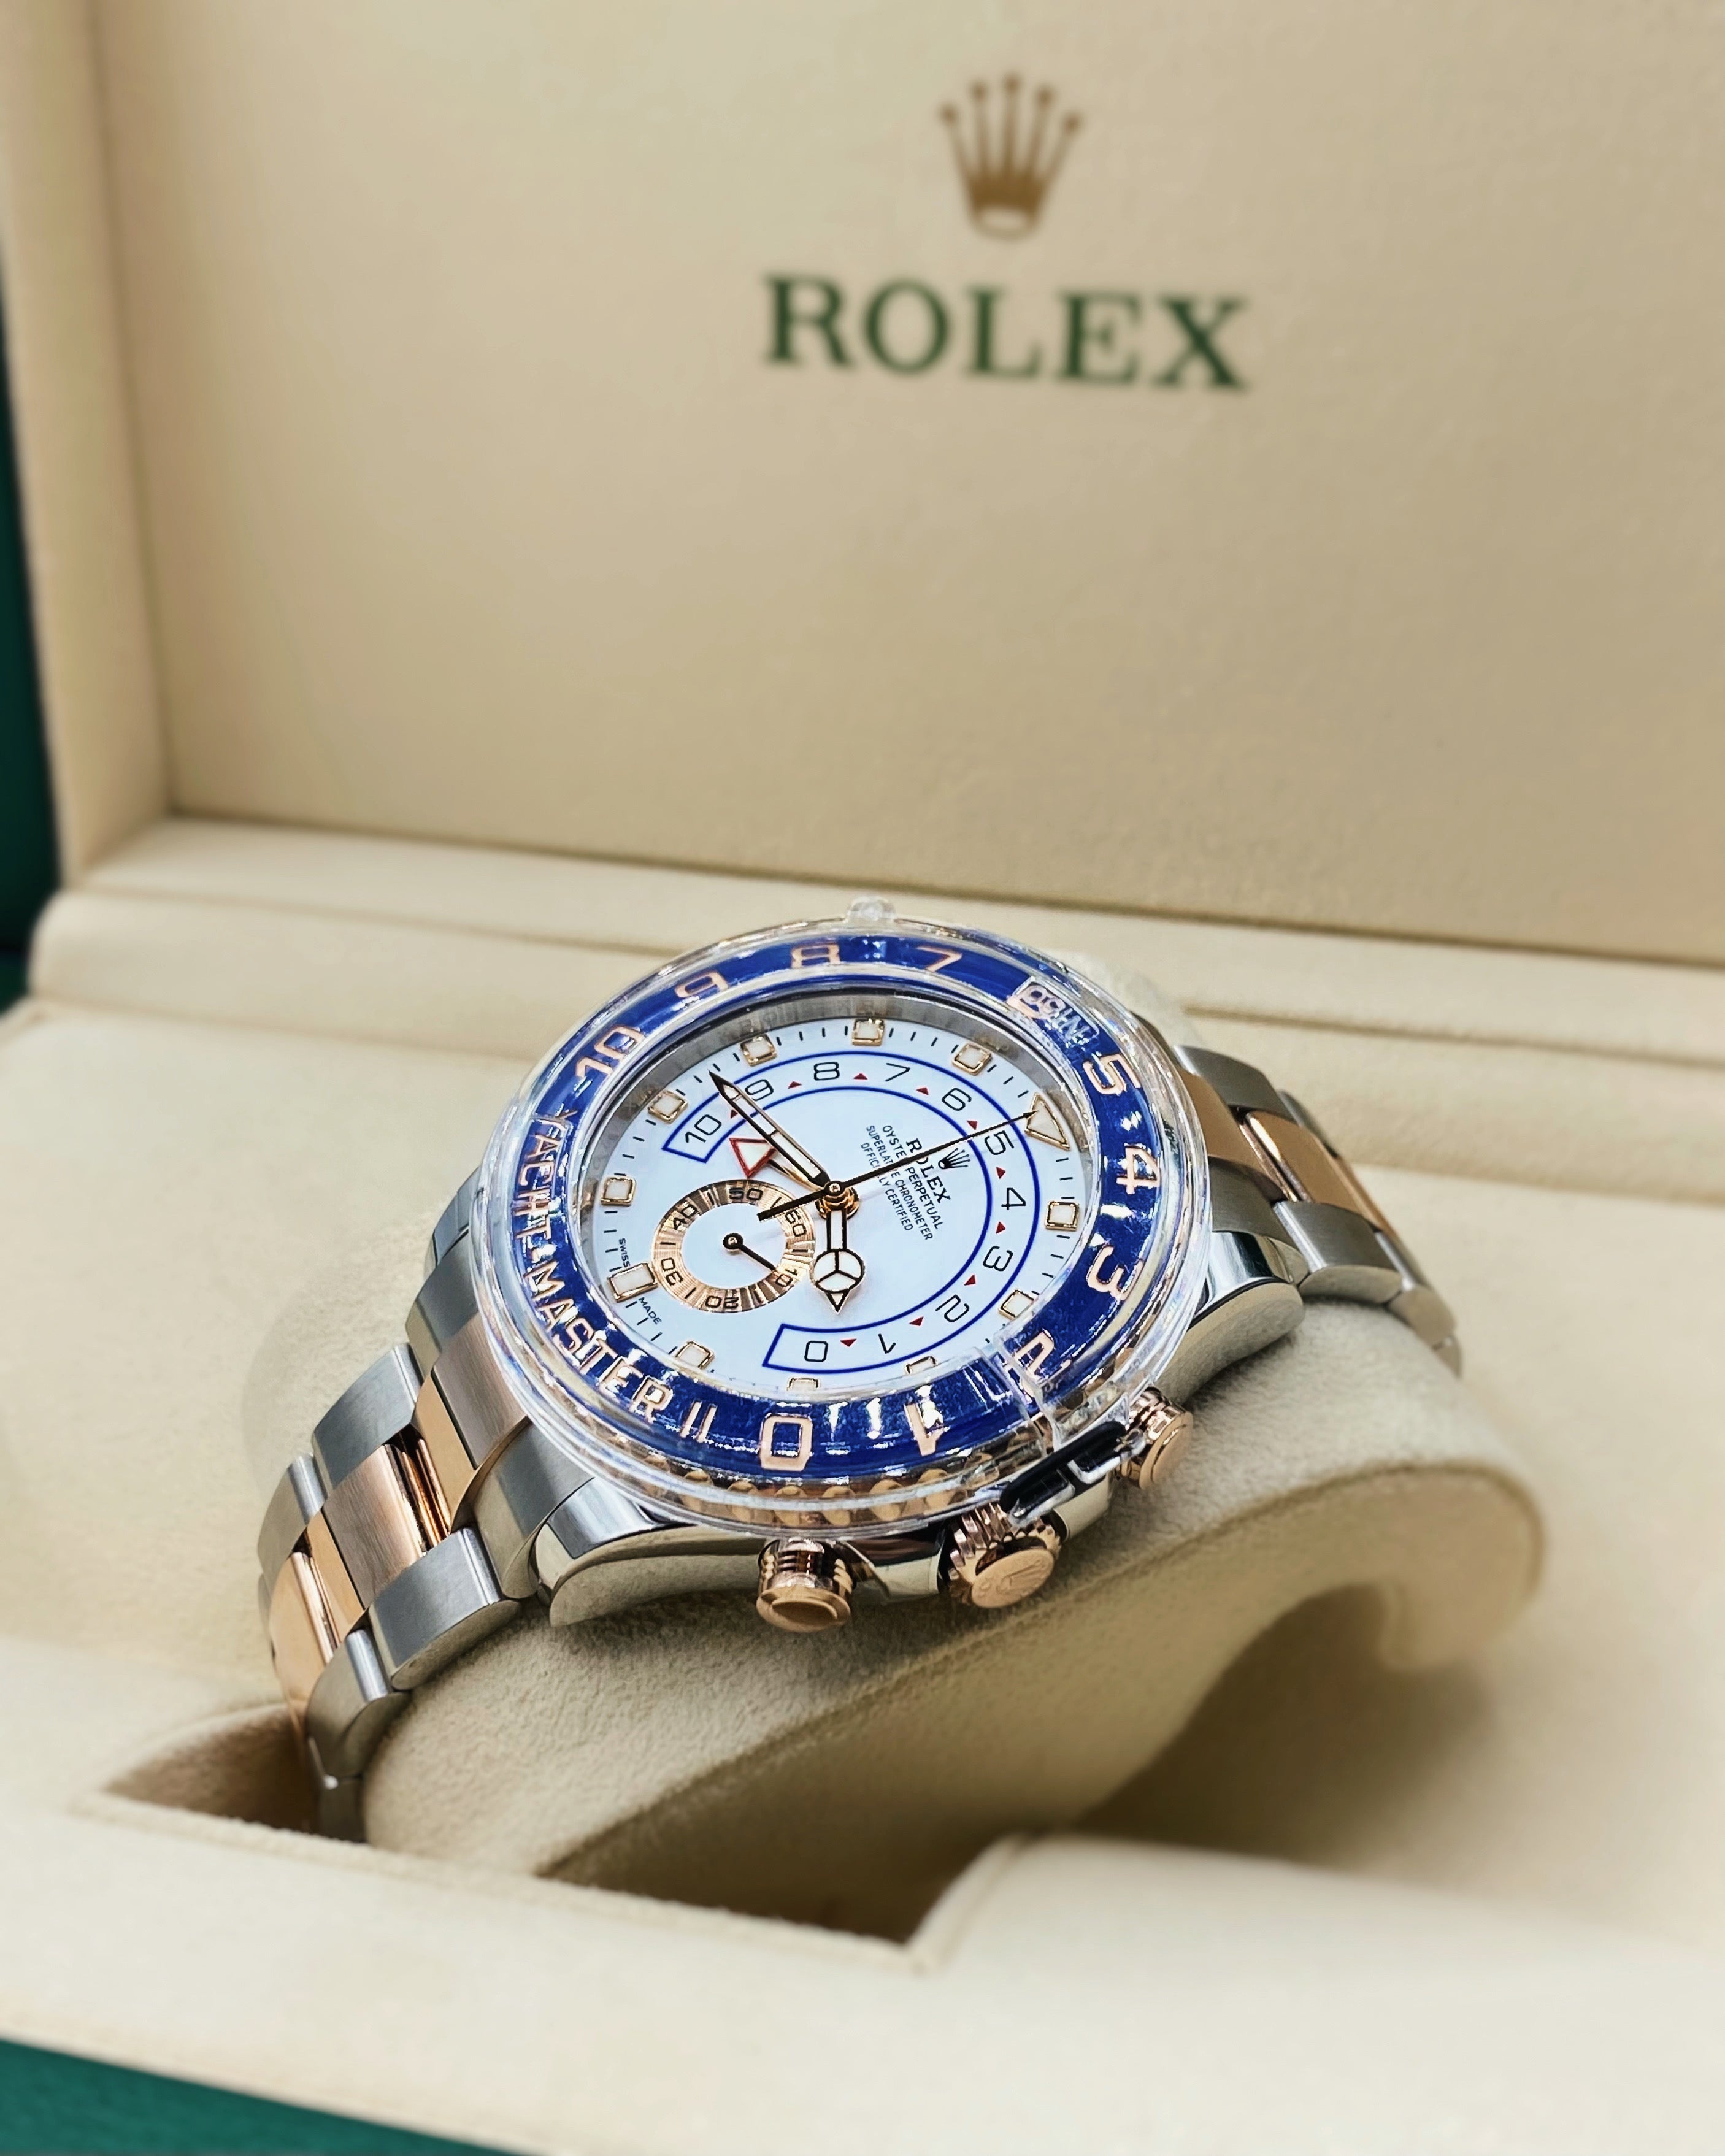 Rolex Yacht-Master II, Steel and 18kt Rose Gold, 116681-0002